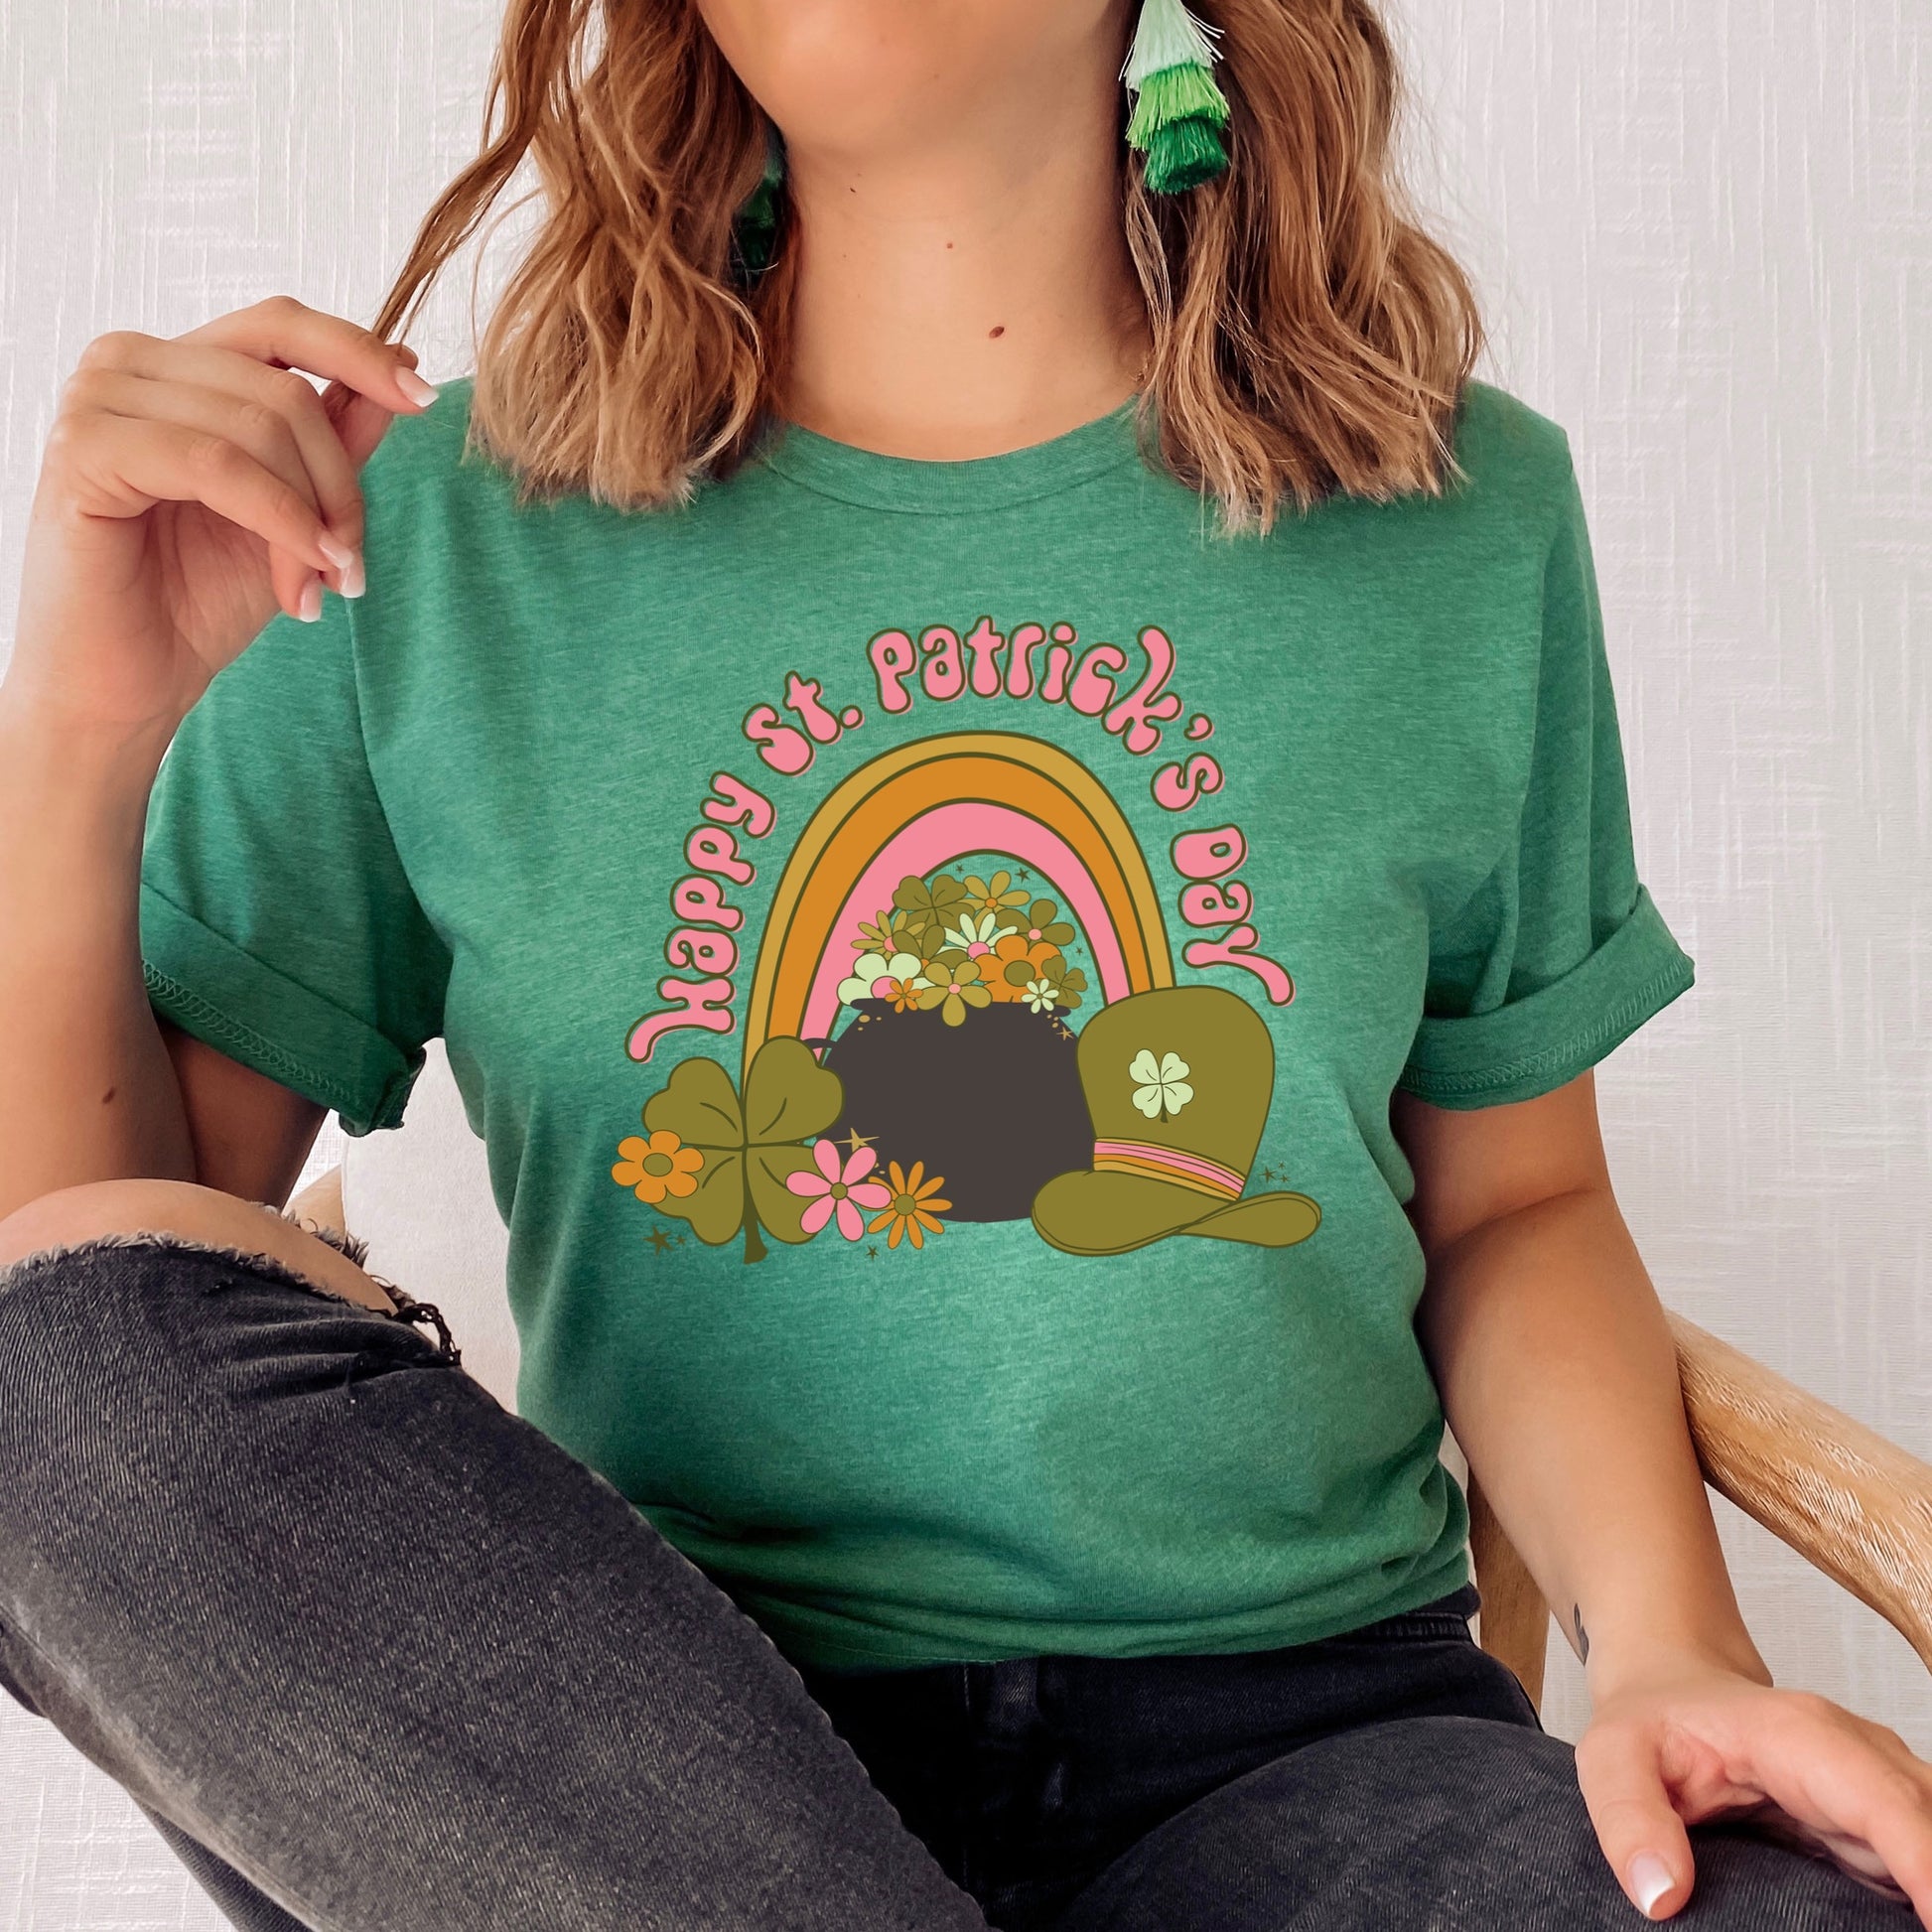 Festive St. Patrick's Day iron on heat transfer with rainbows, clovers, and flowers 